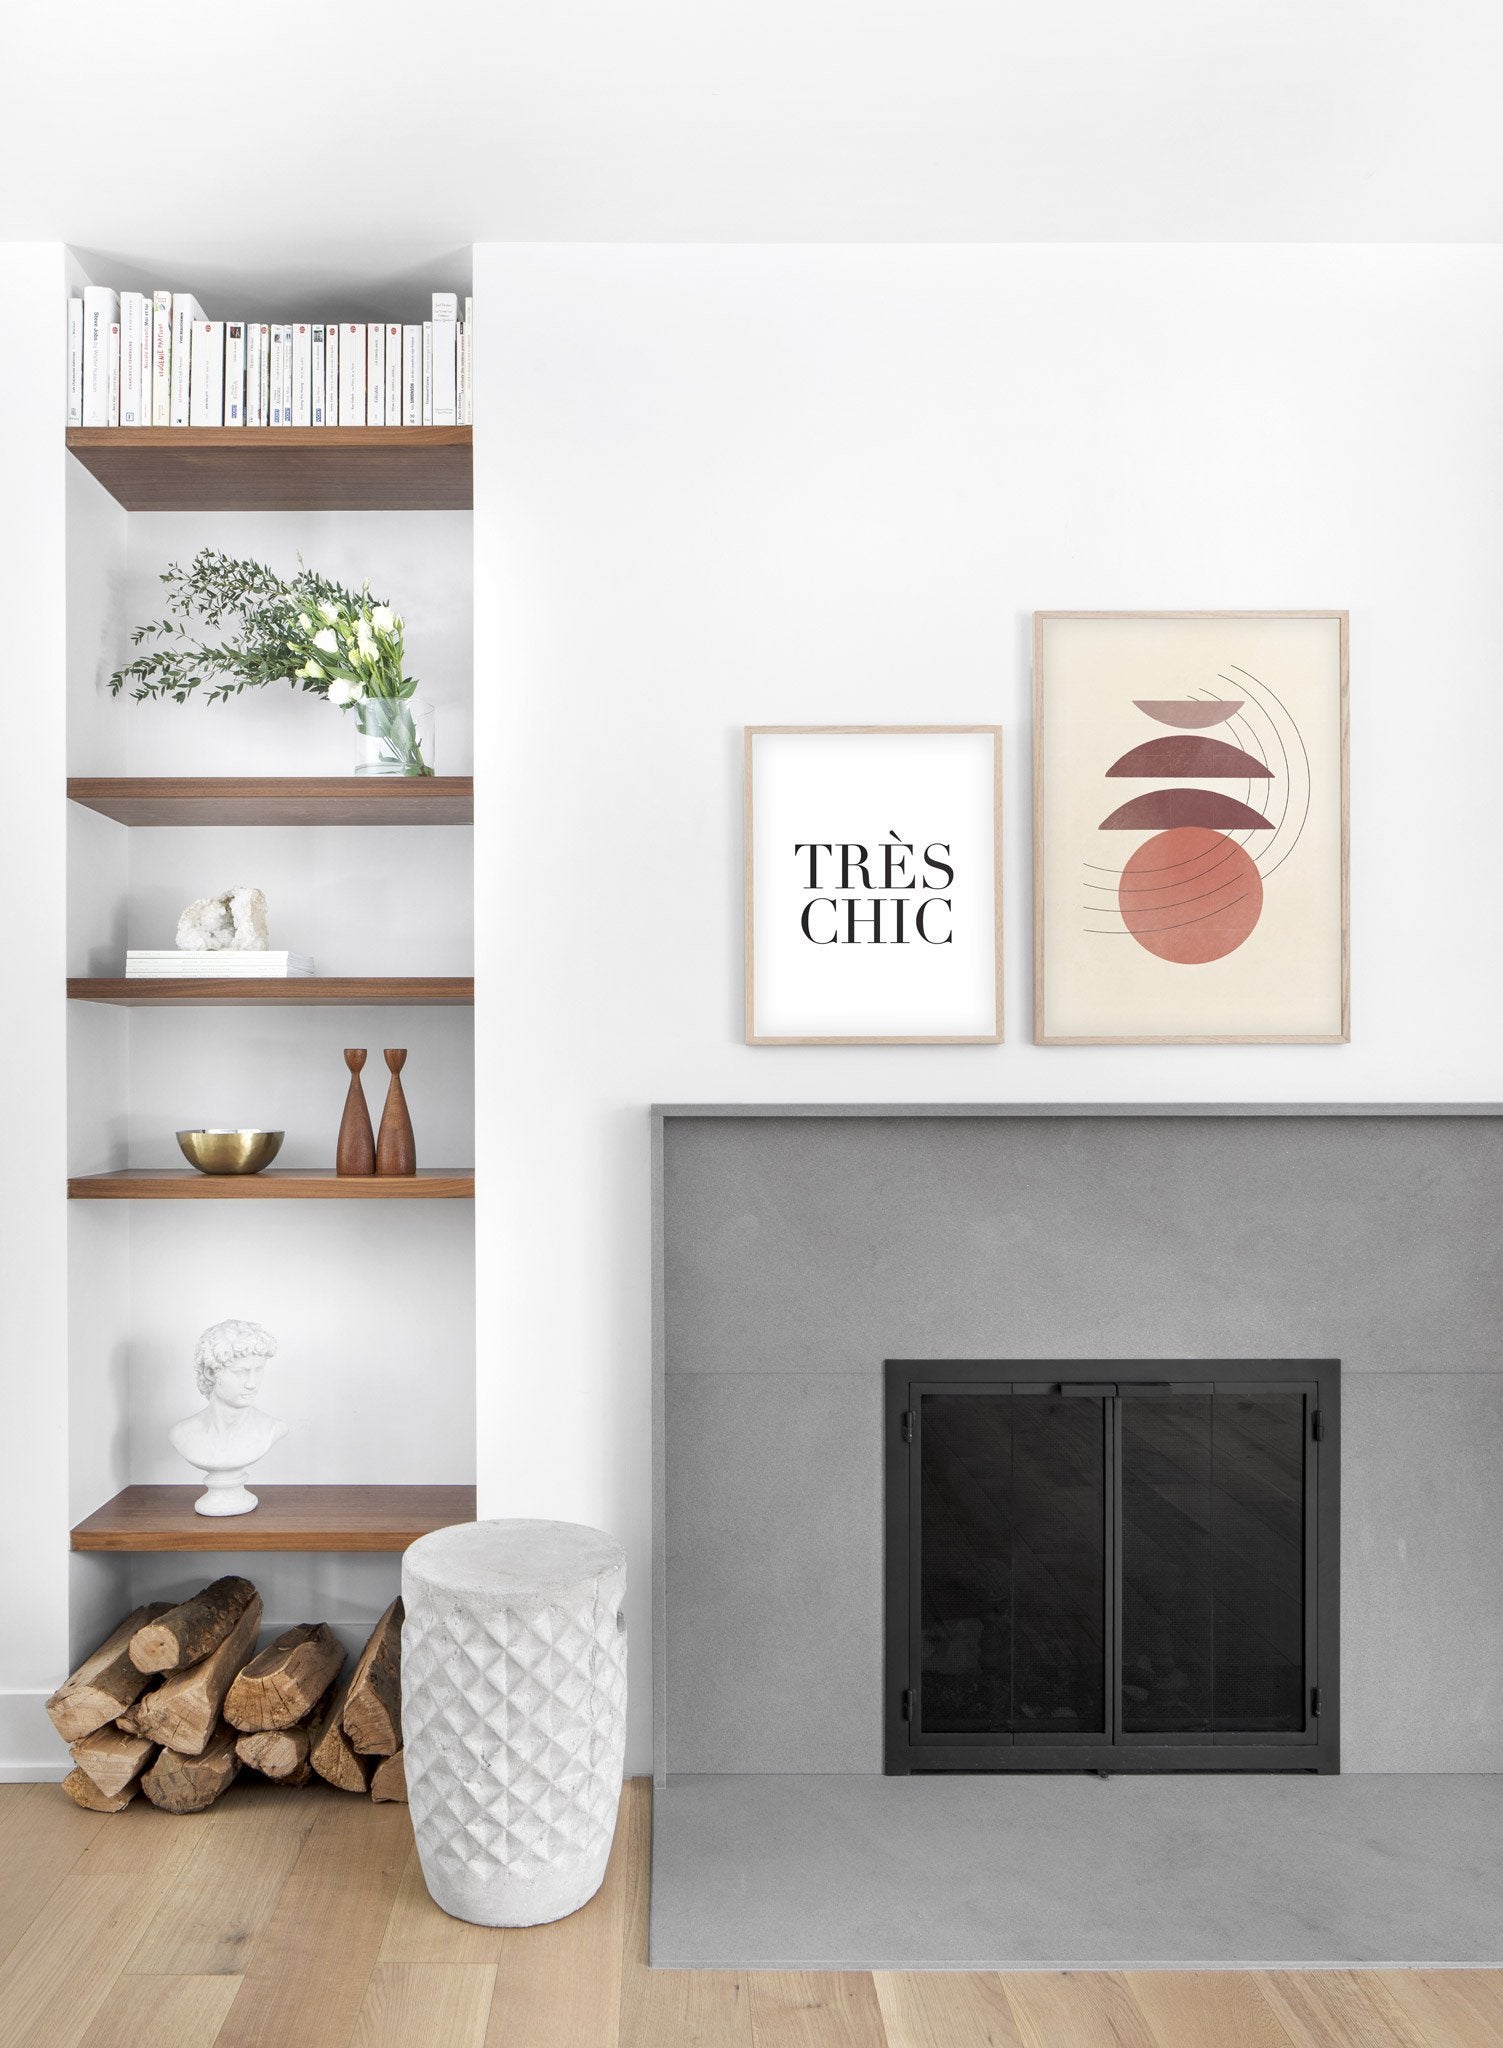 Modern minimalist poster by Opposite Wall with abstract design of Symphony by Toffie Affichiste - Gallery Wall Duo - Living Room Fireplace